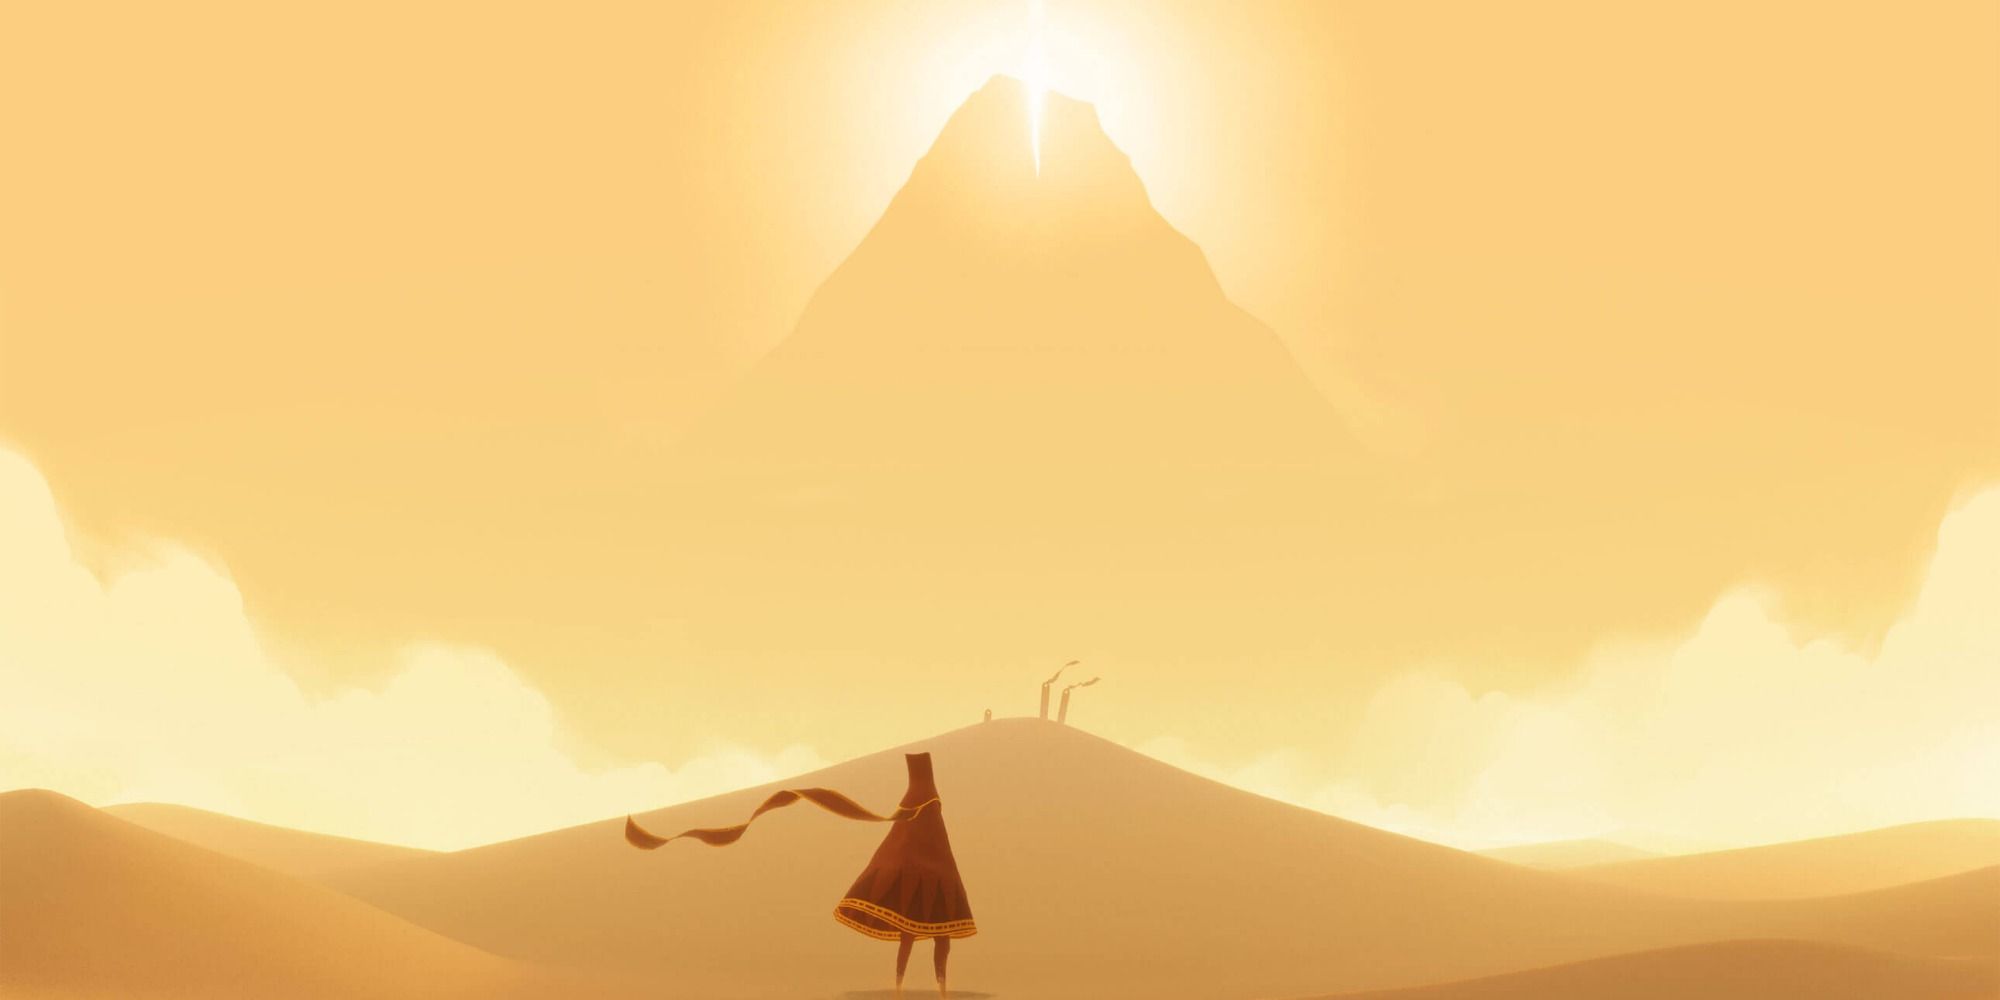 The main character of Journey stands in a desert at the base of a mountain, looking up at a glowing light at the top of the peak